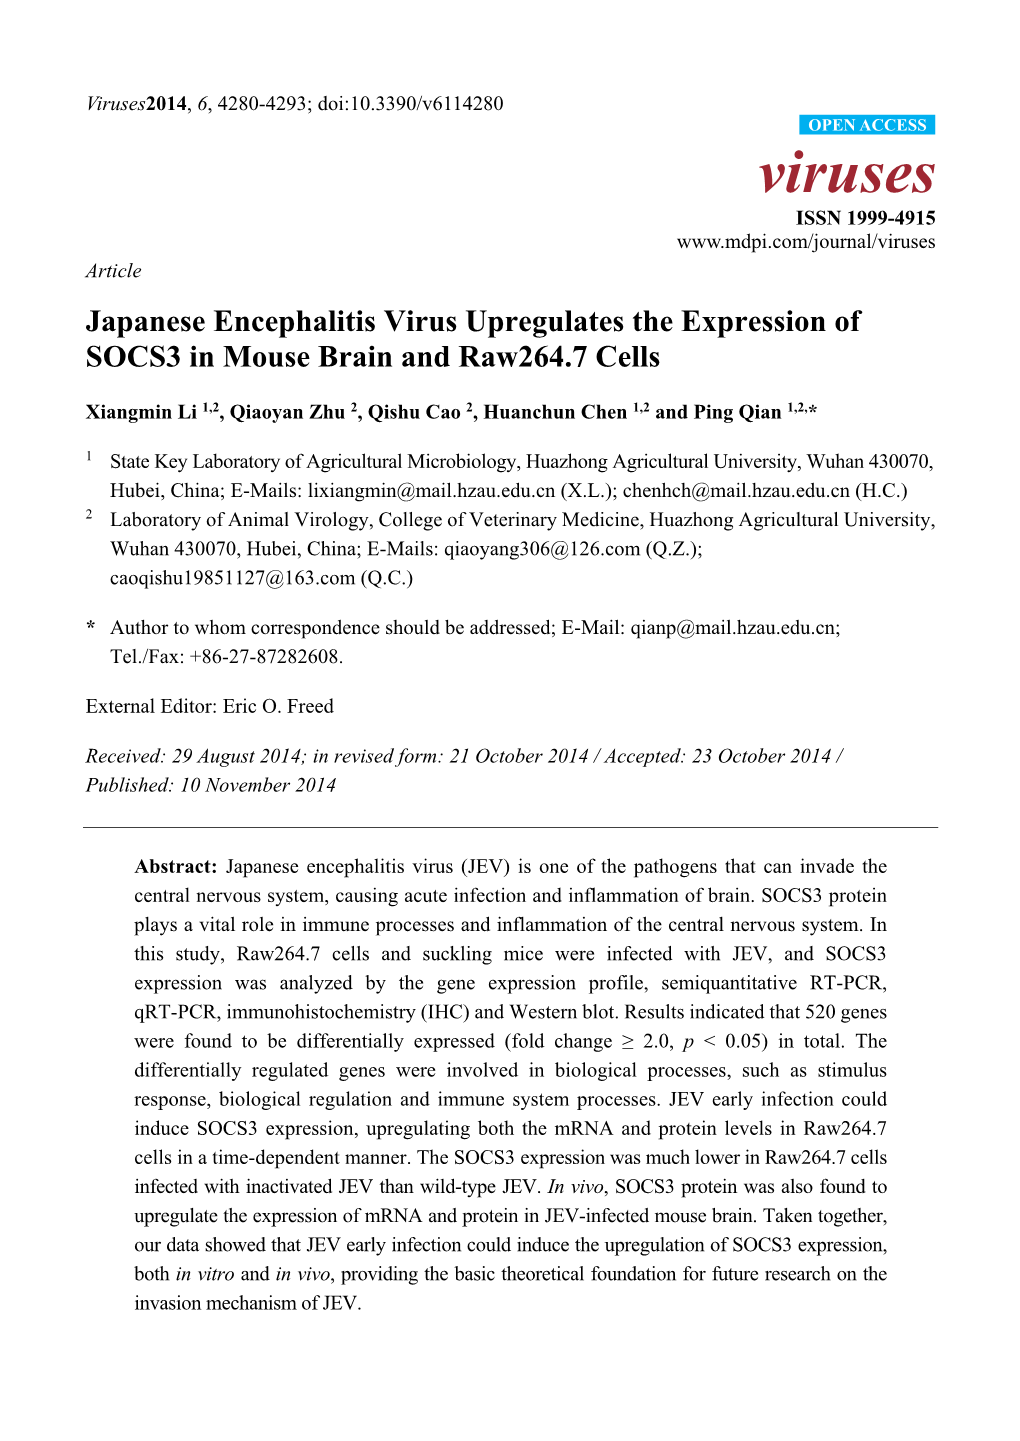 Japanese Encephalitis Virus Upregulates the Expression of SOCS3 in Mouse Brain and Raw264.7 Cells